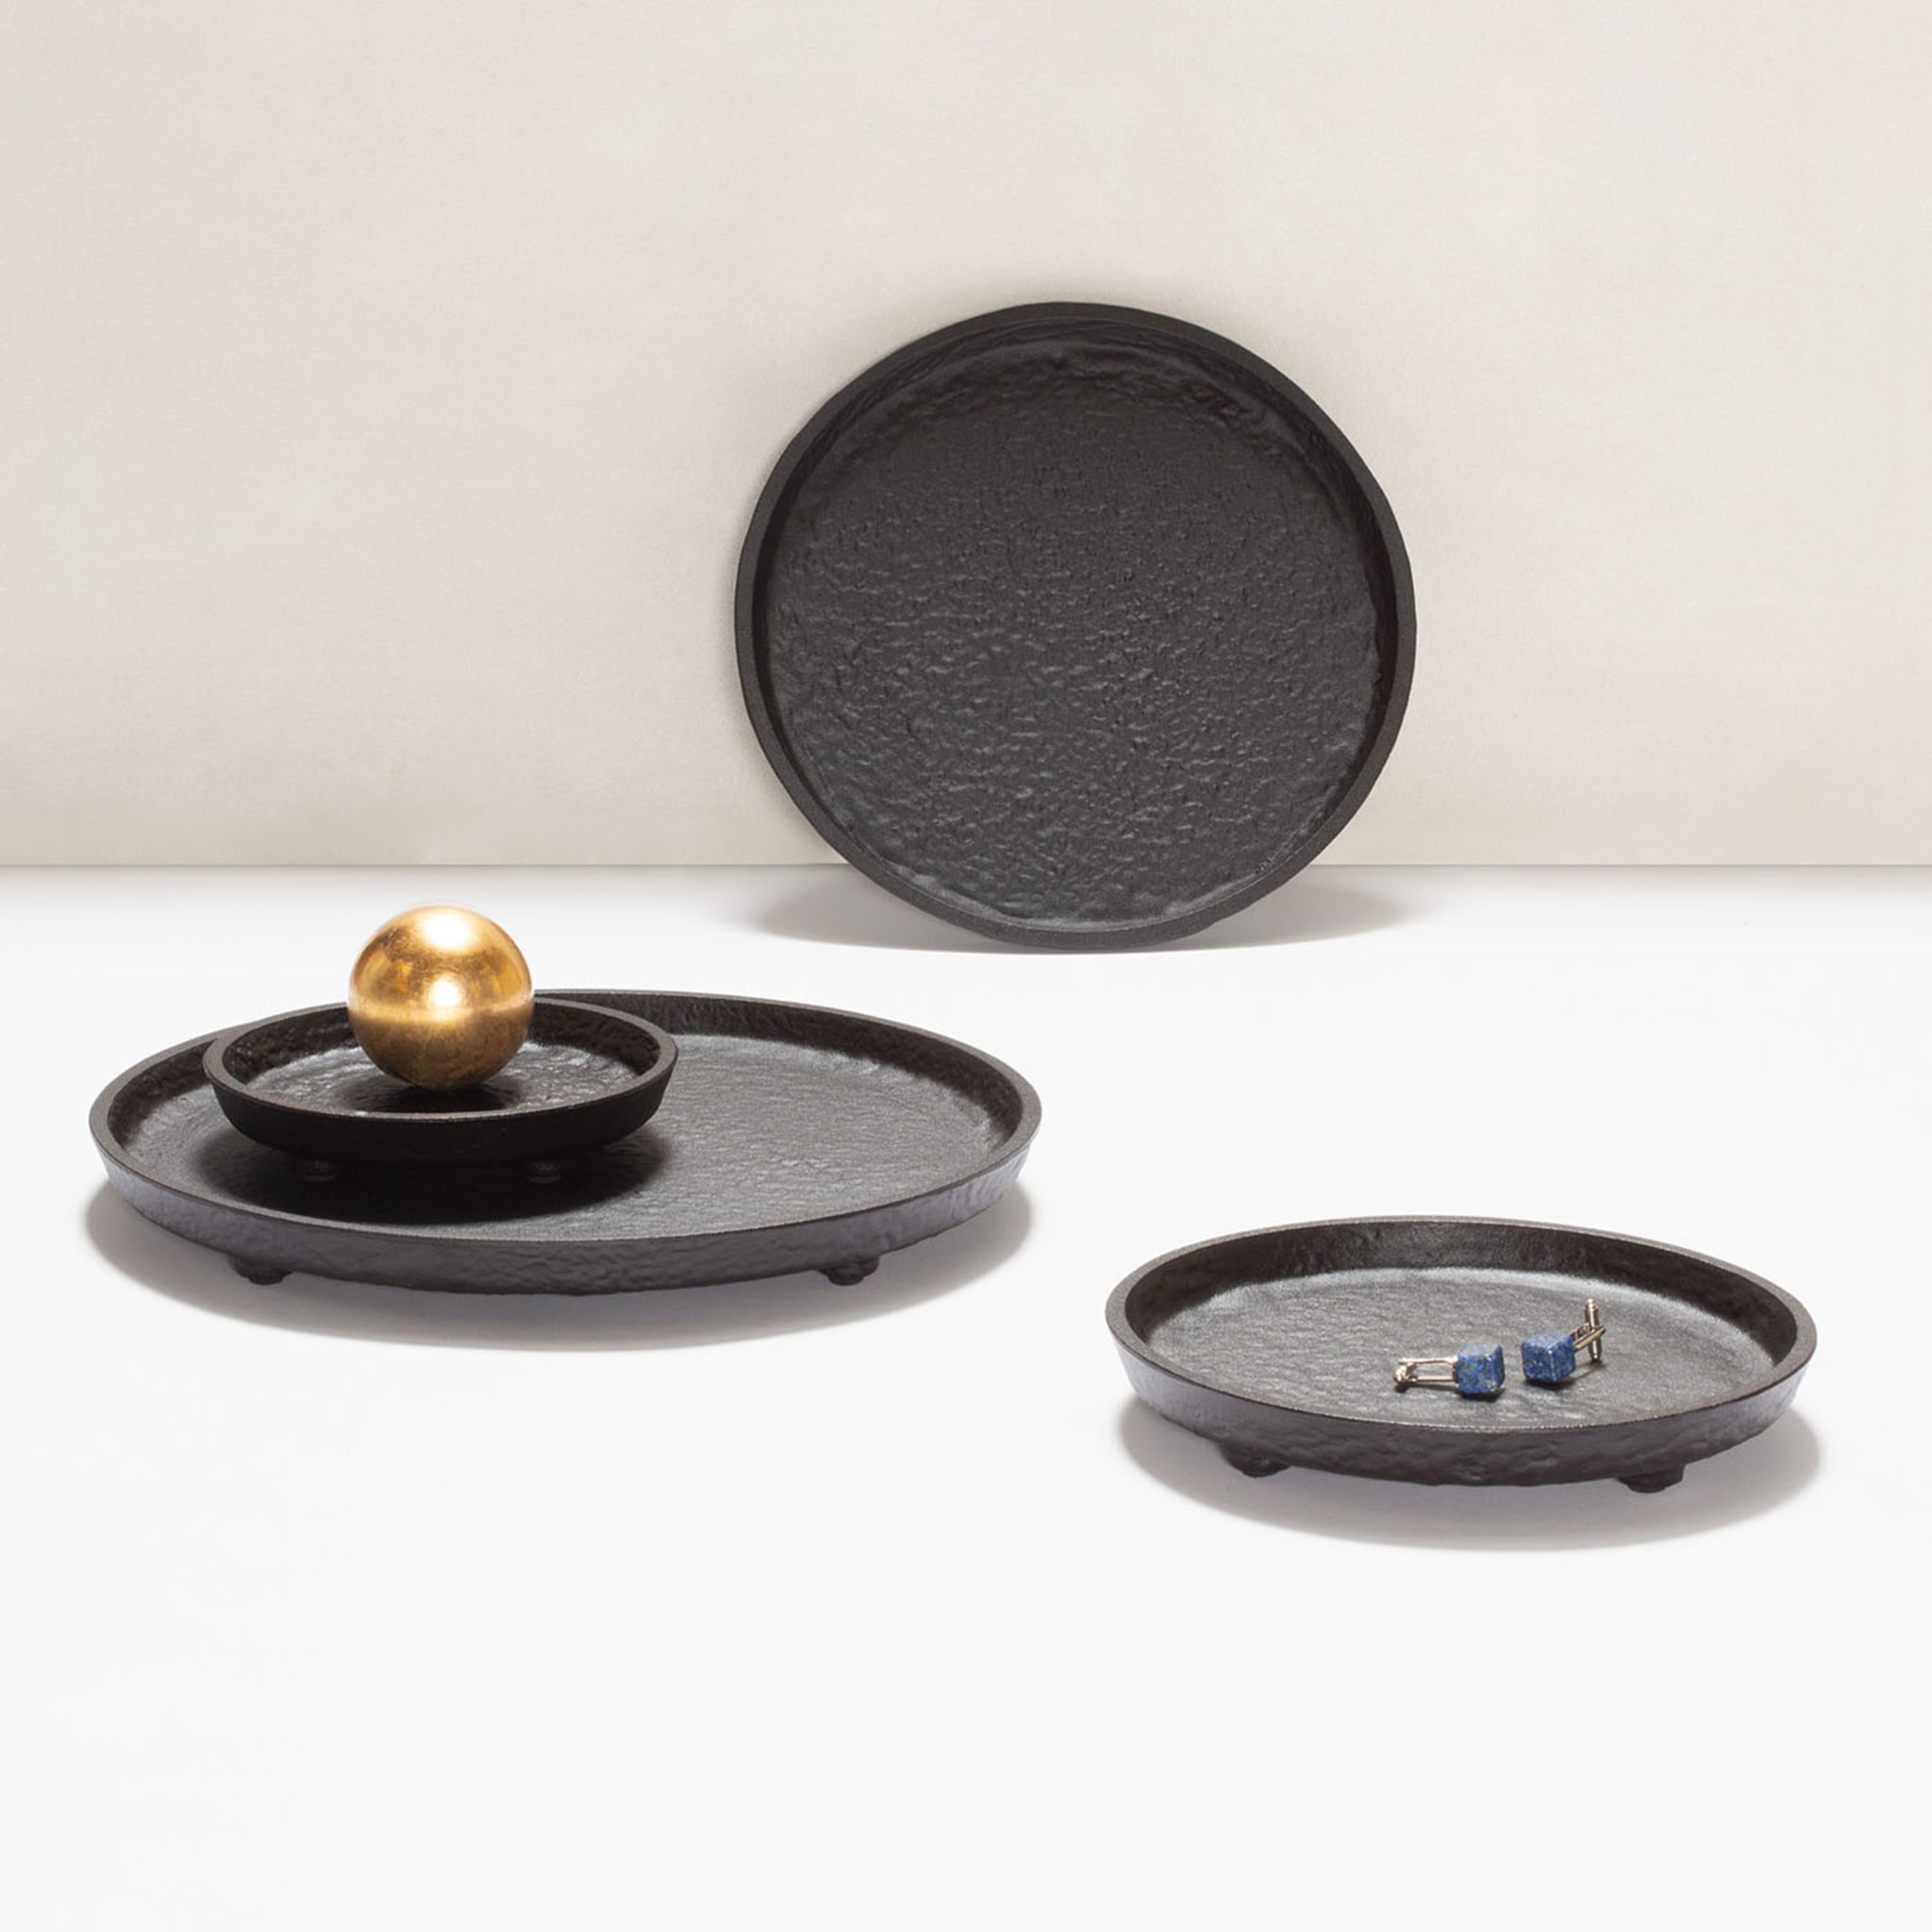 Monza Imperfect Bronze Round Small Valet Tray - Alternative view 2